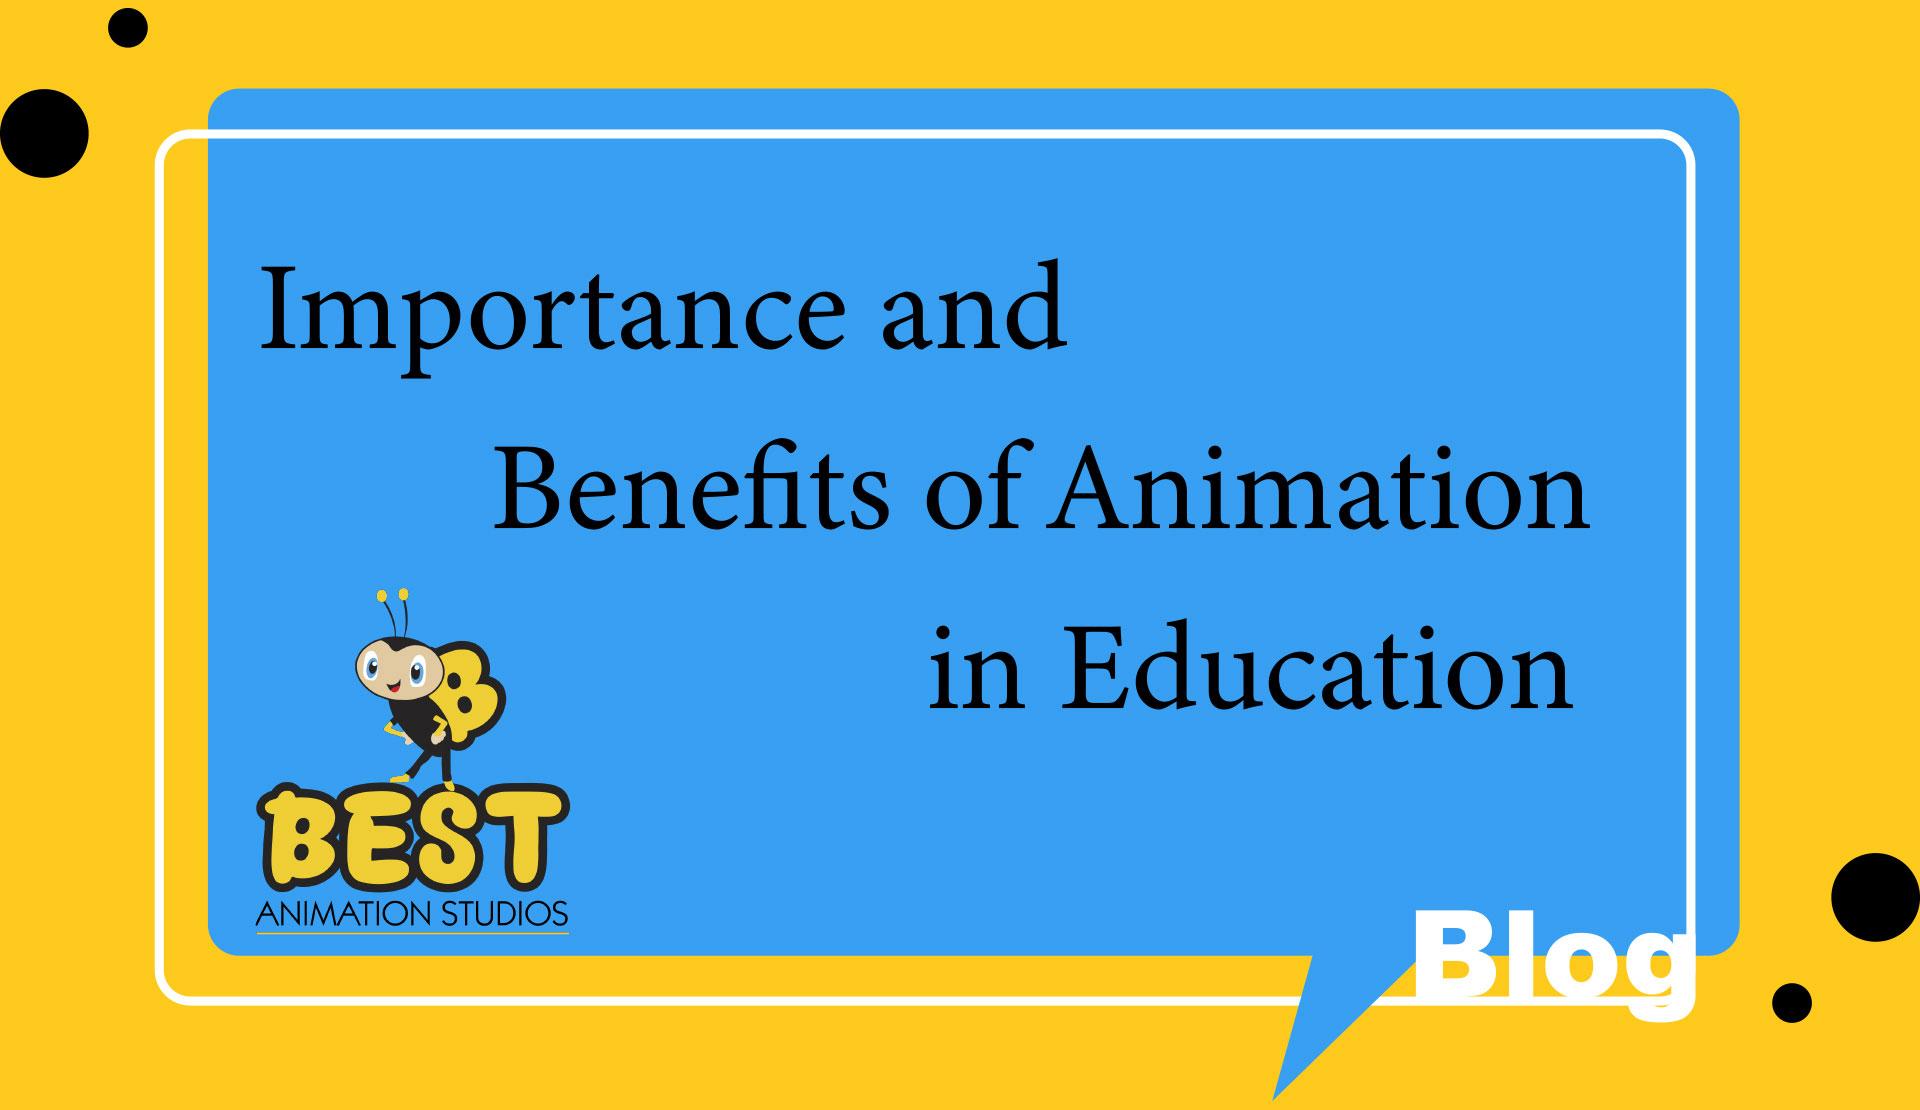 Importance and Benefits of Animation in Education